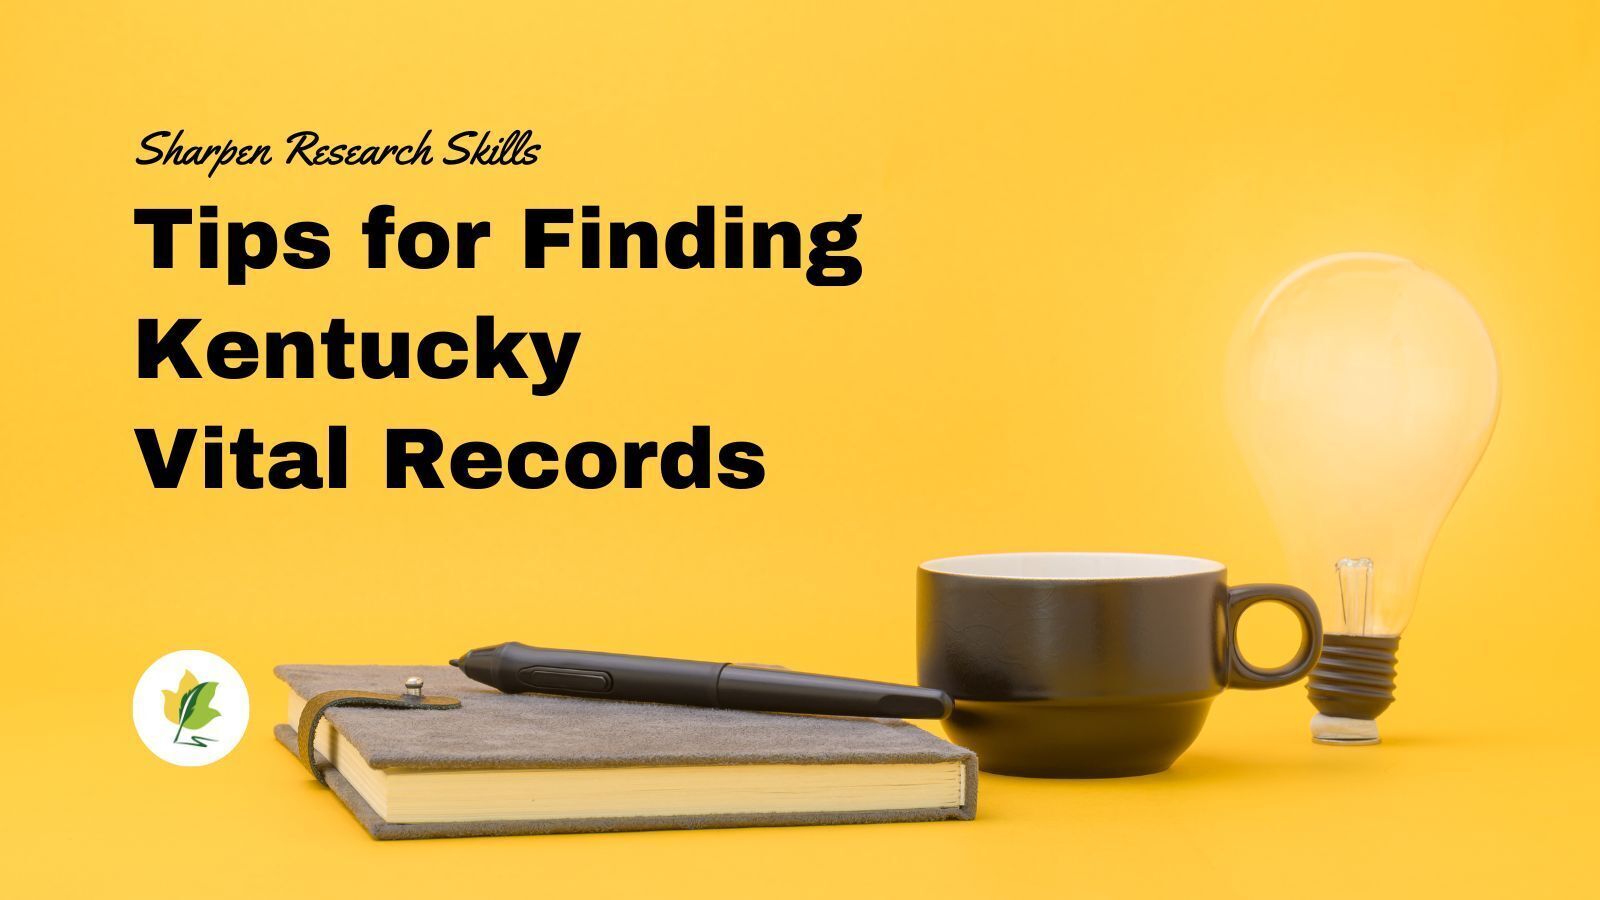 Tips for Finding Kentucky Vital Records